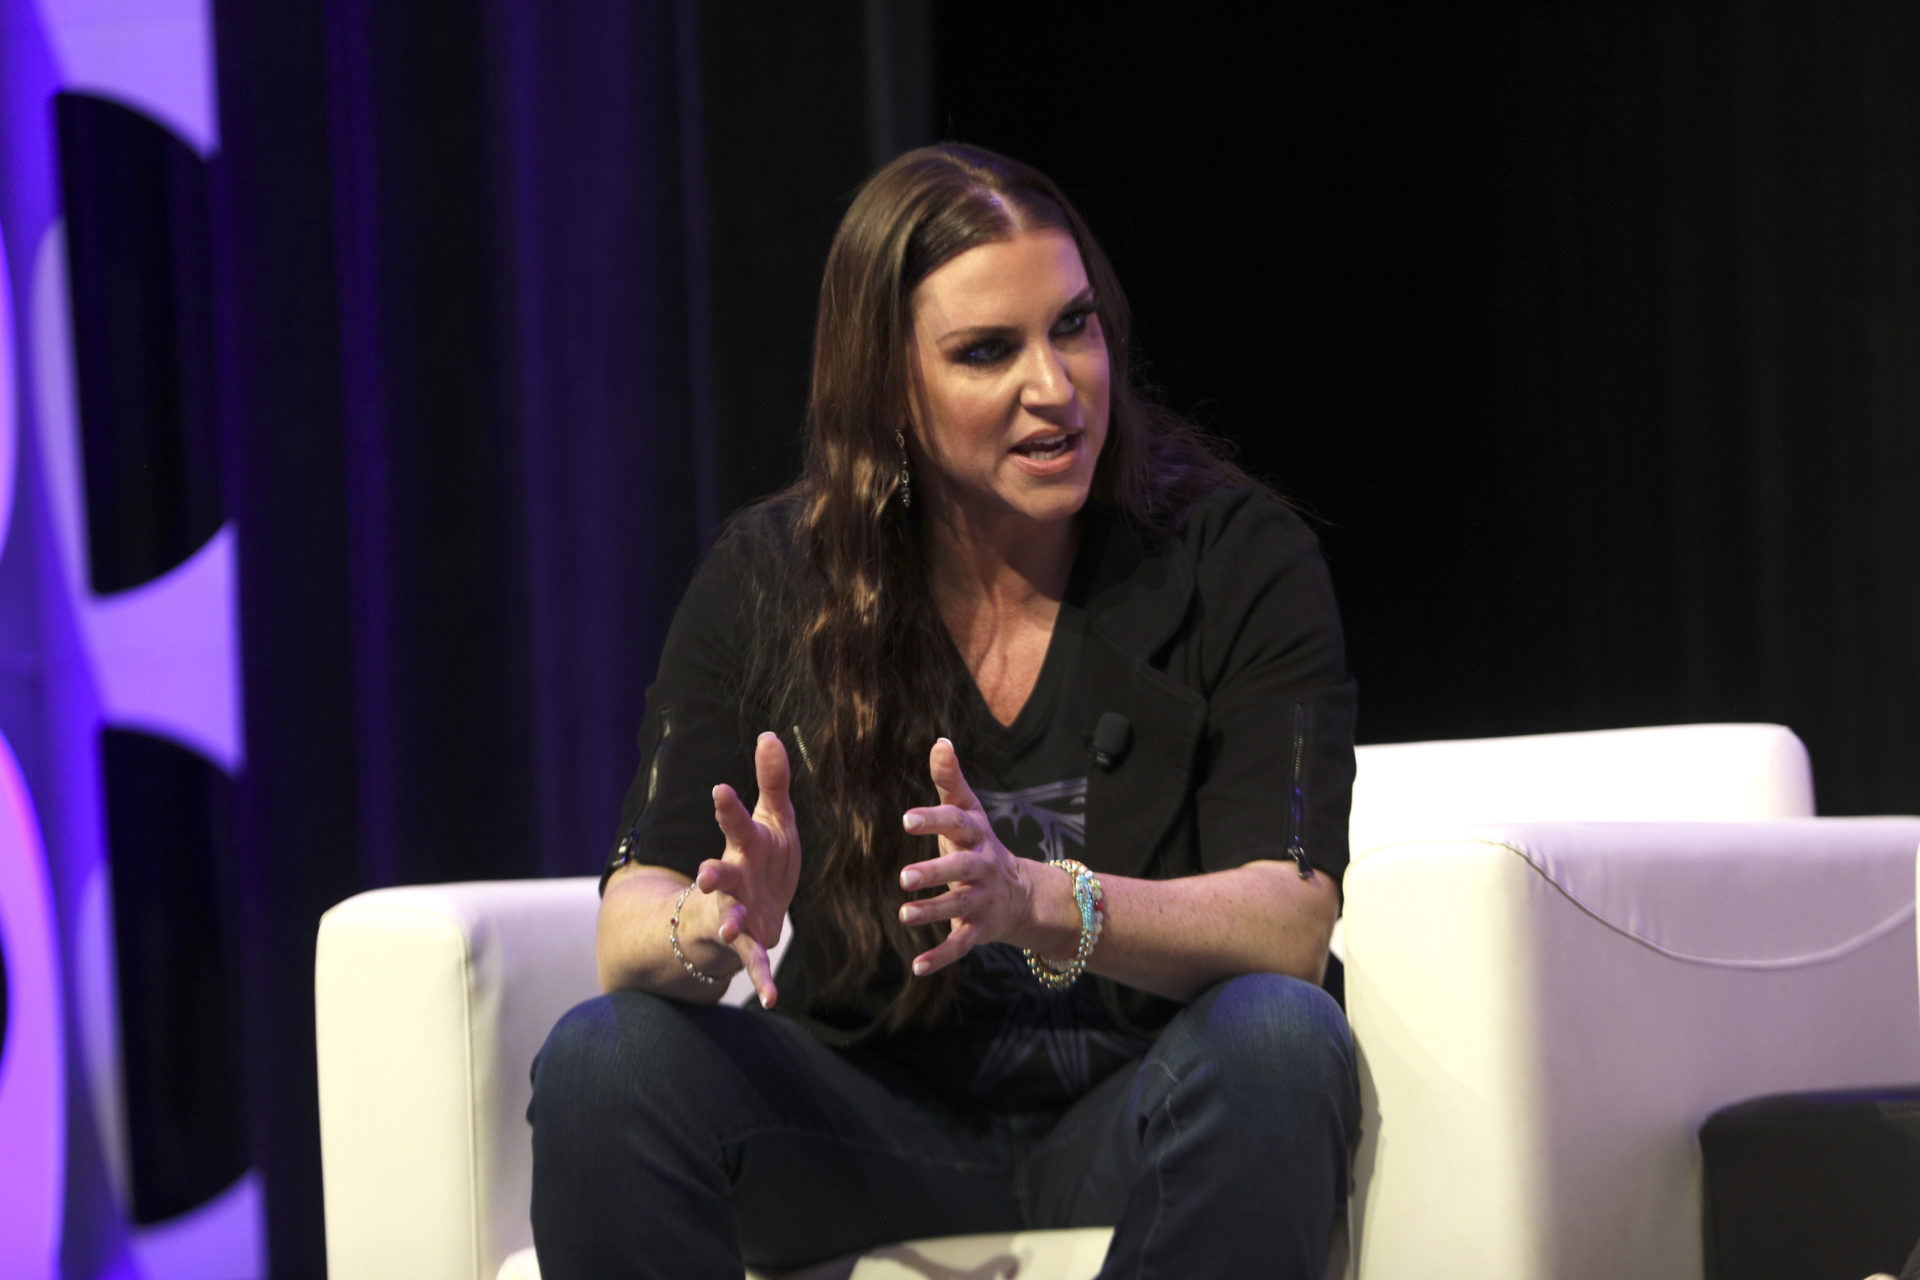 Meet the Women Dominating Sports Media - 2022 SXSW Conference and Festivals